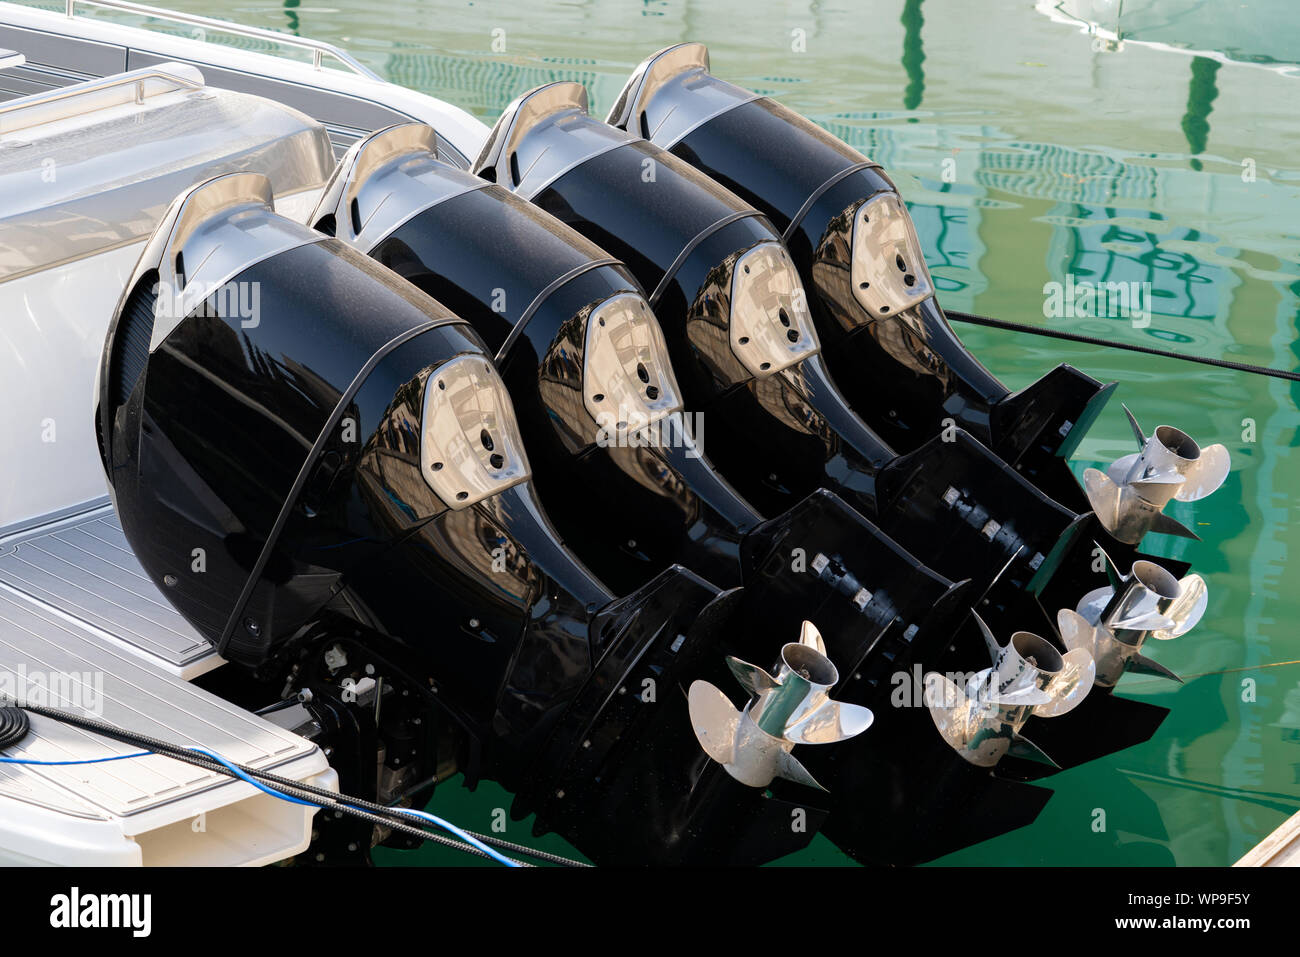 Four outboard motors on a speedboat Stock Photo